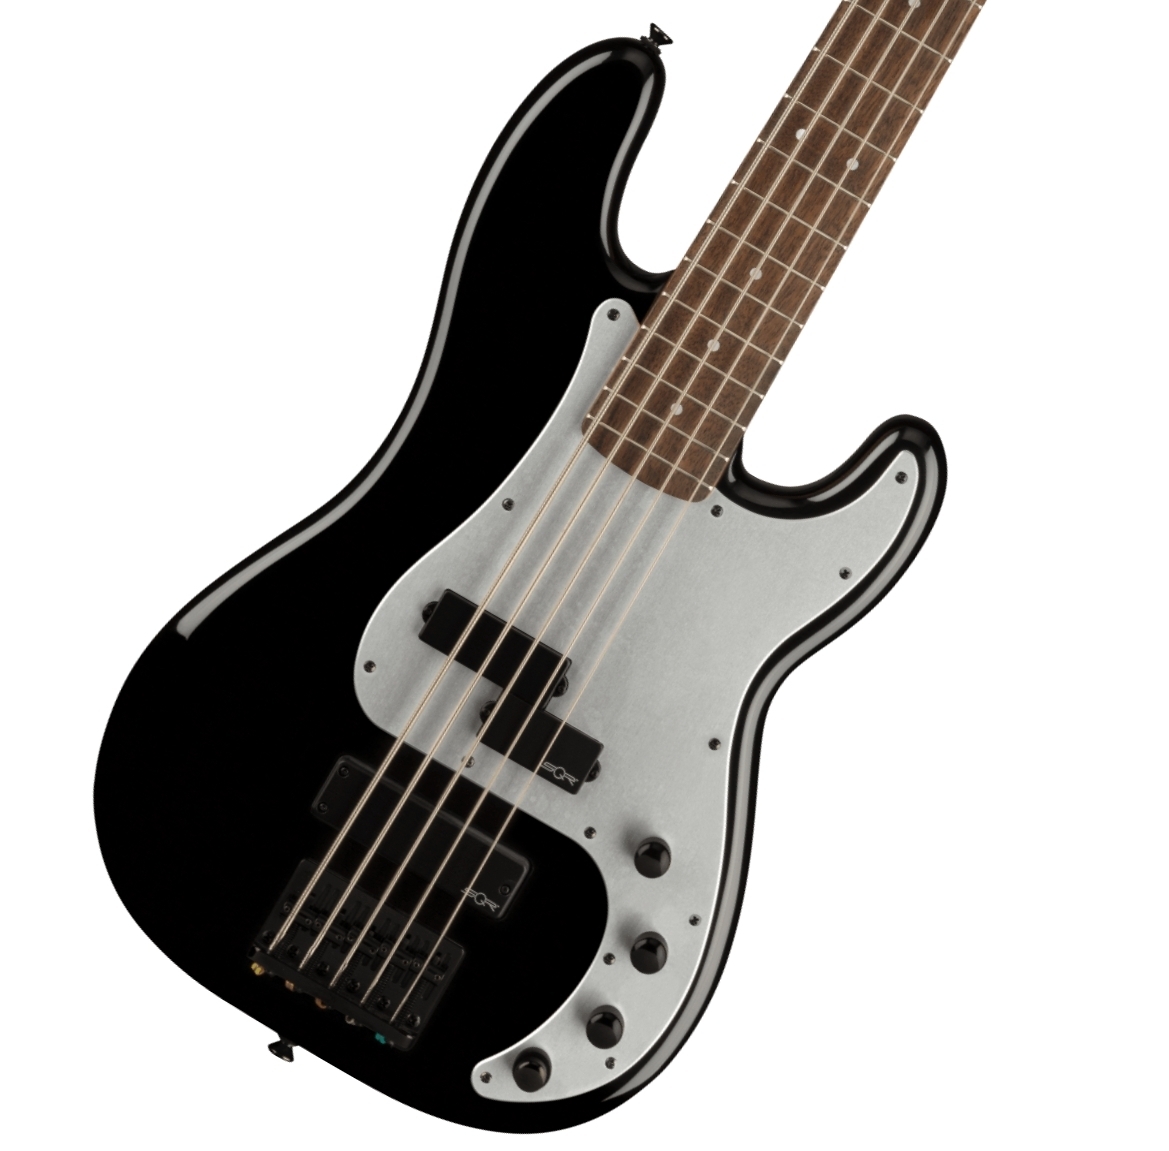 【4474】 Squier by fender precision bass